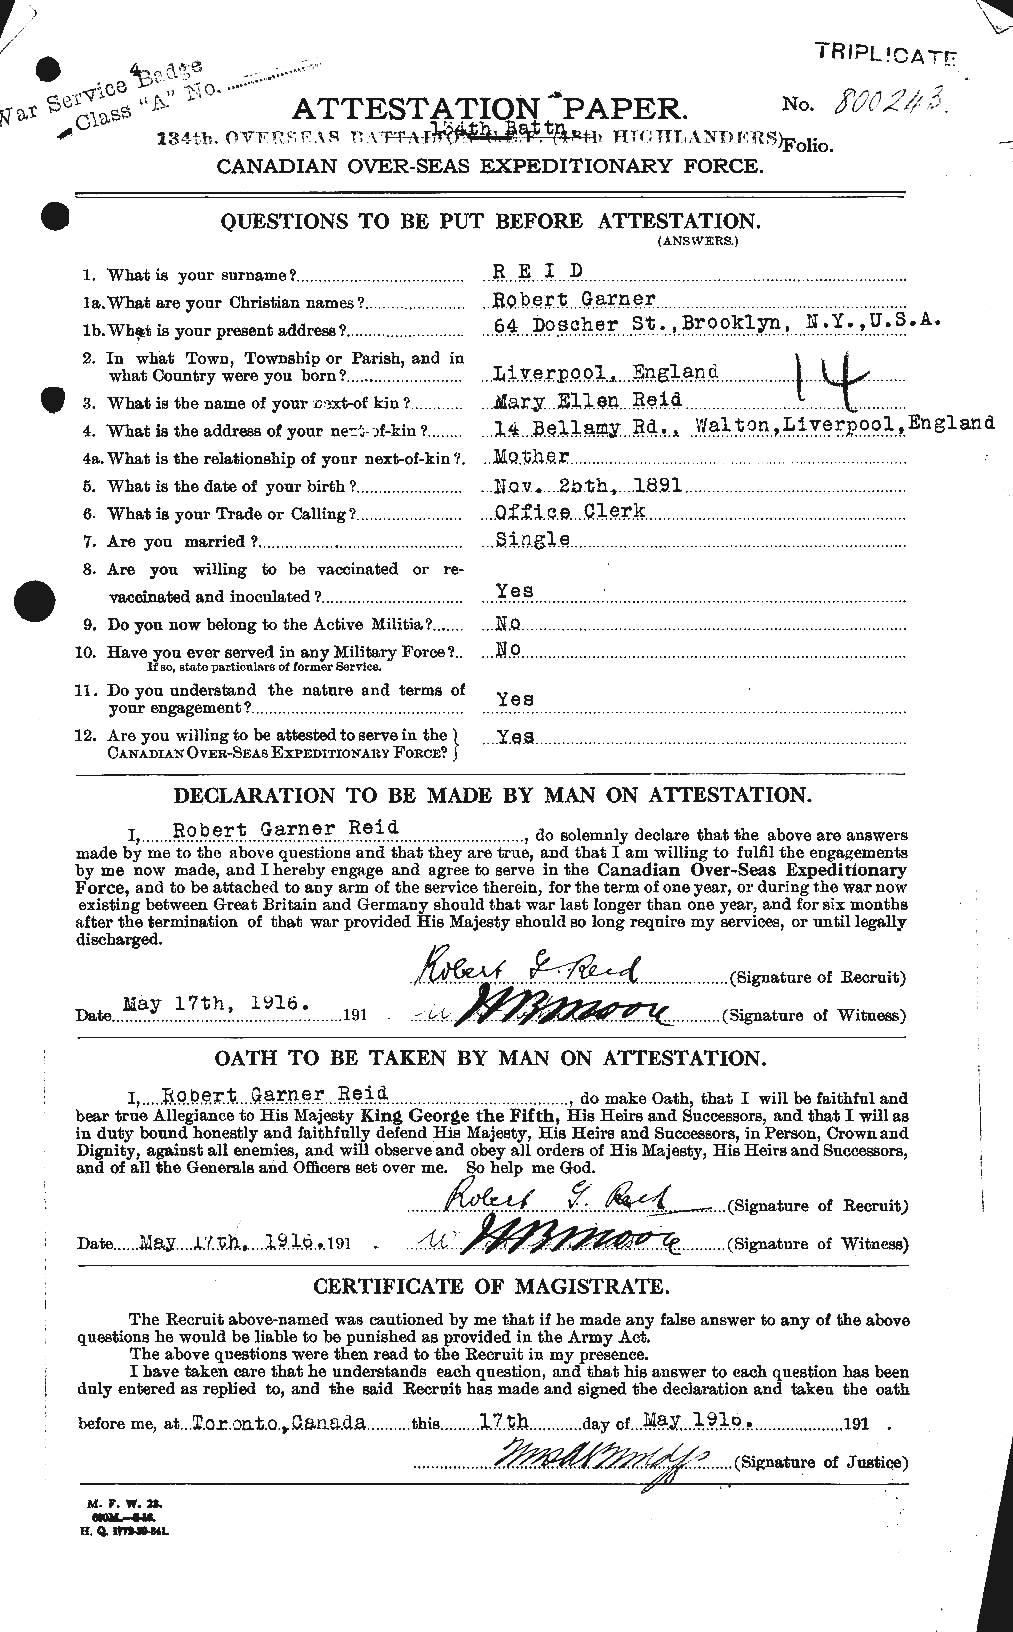 Personnel Records of the First World War - CEF 601900a